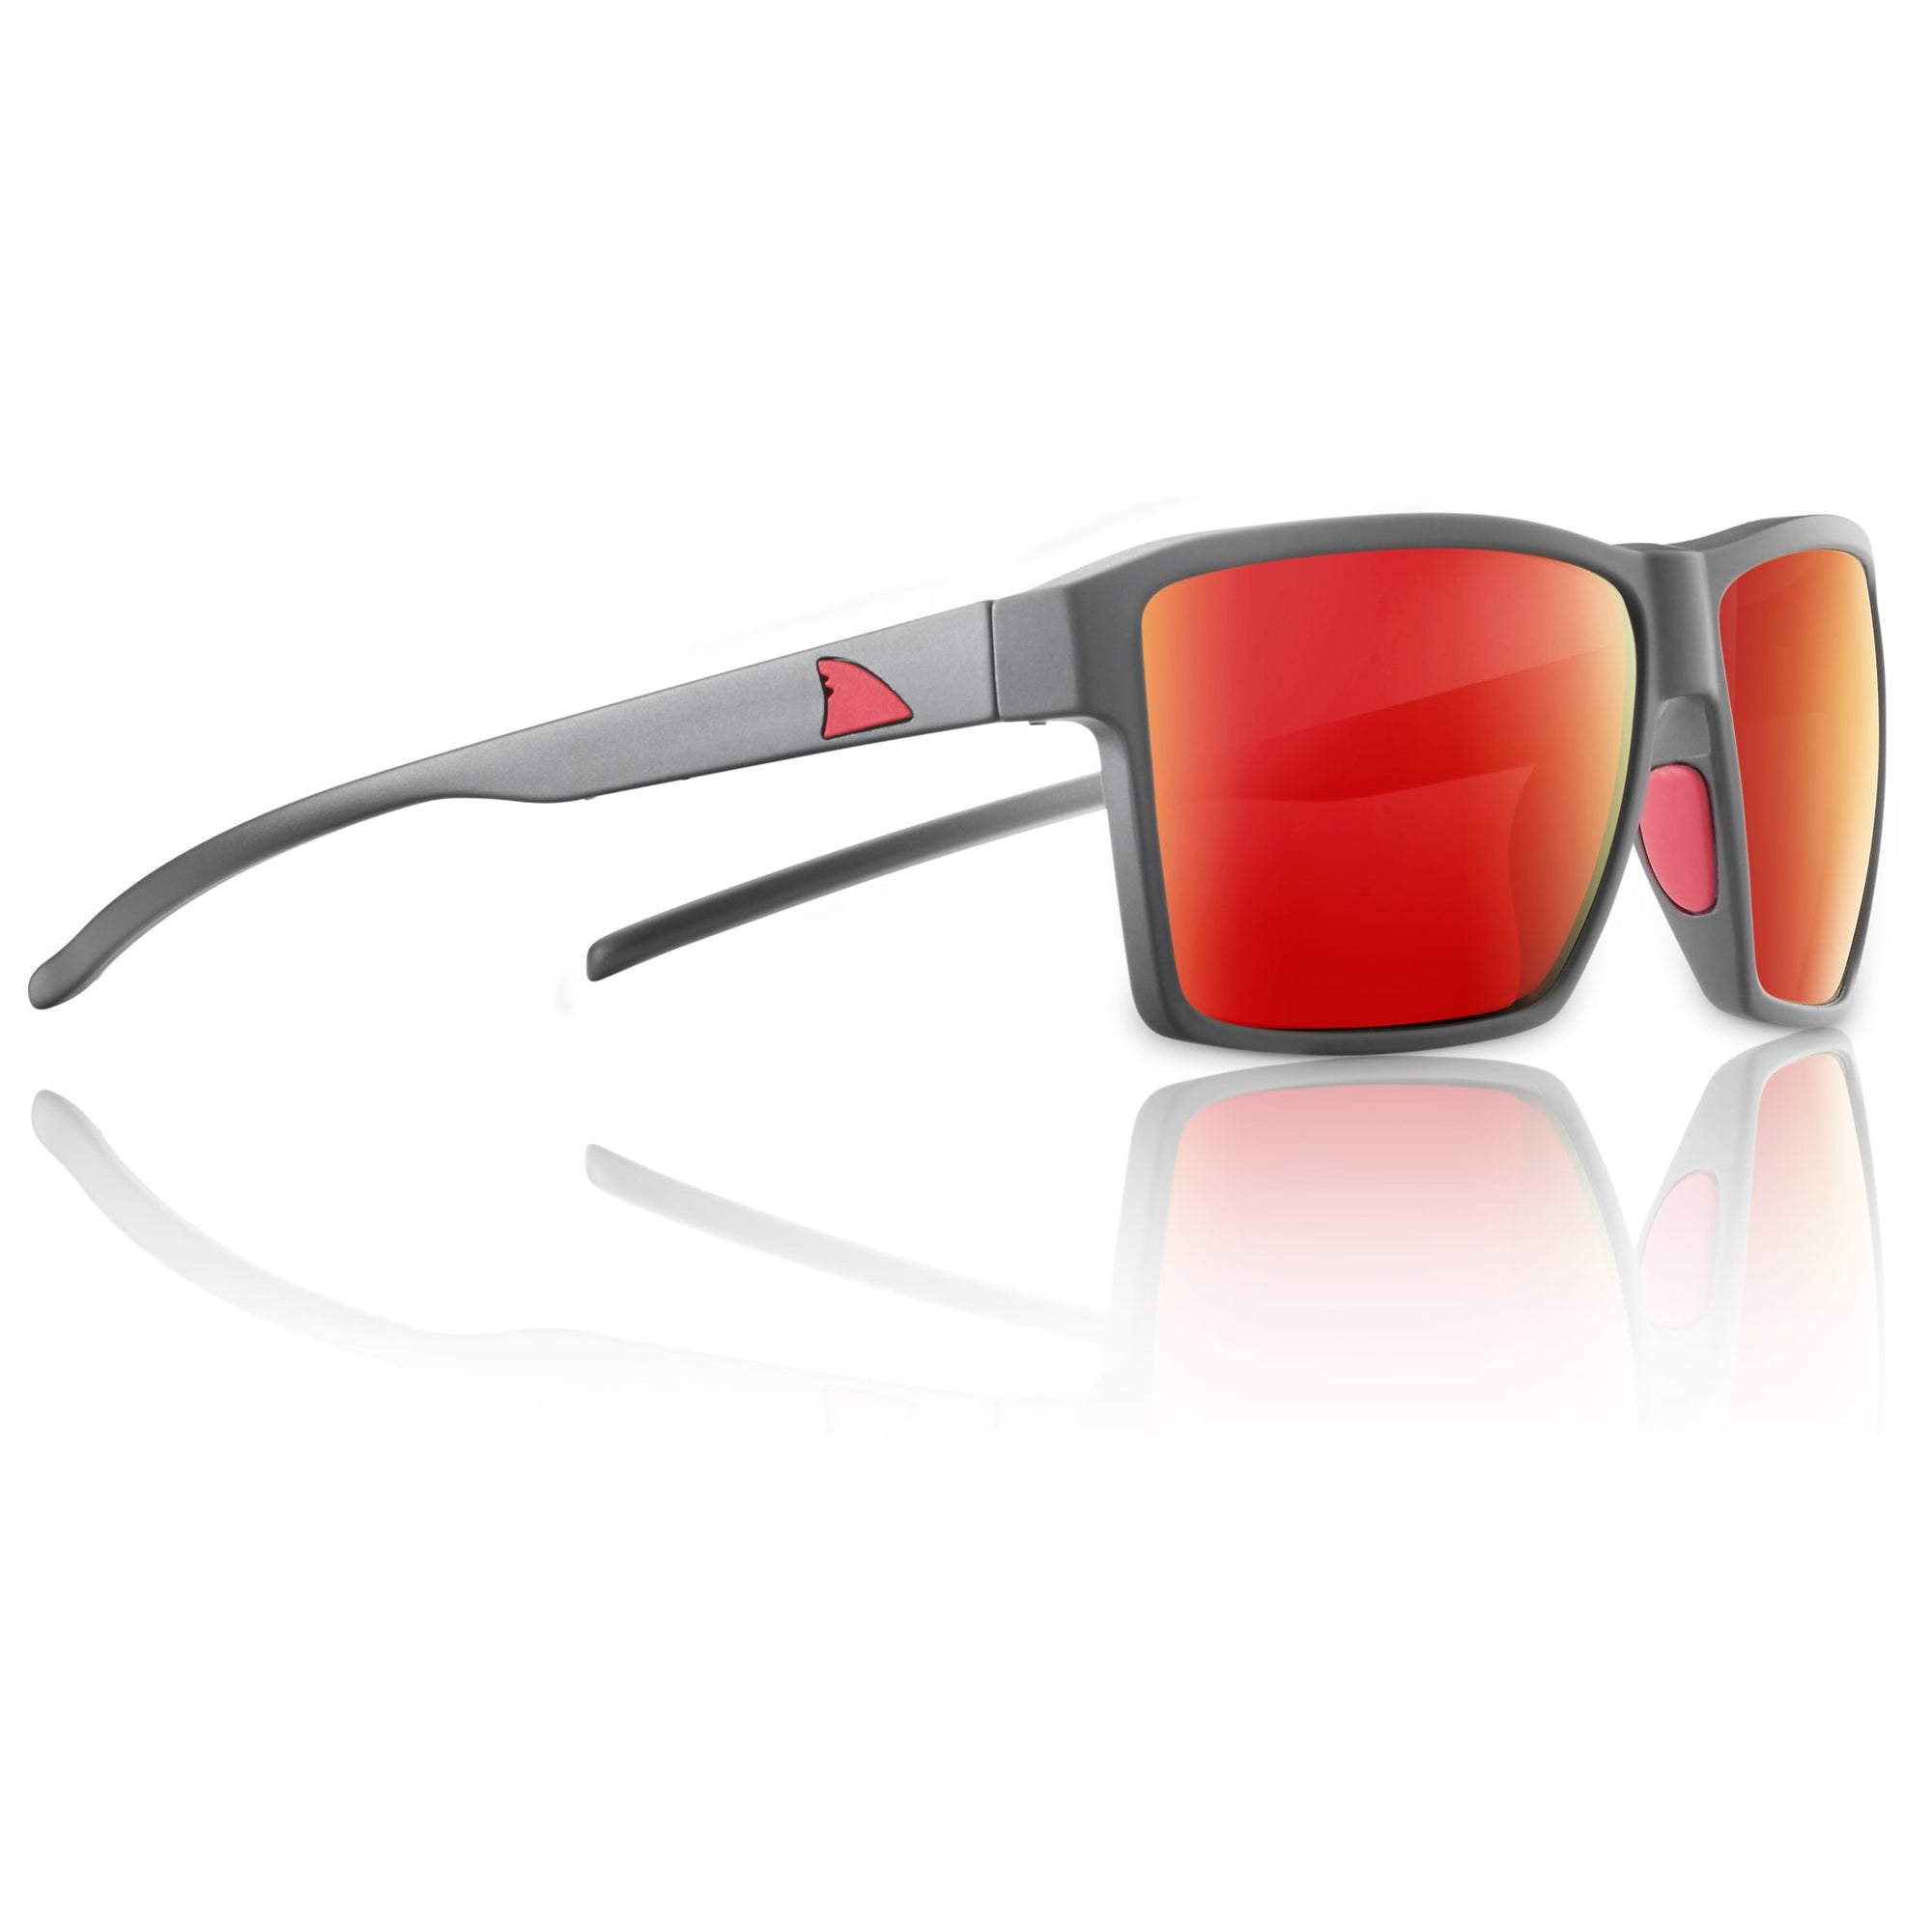 | Hatteras | Matte Gray-Hull Red - RedFin Polarized